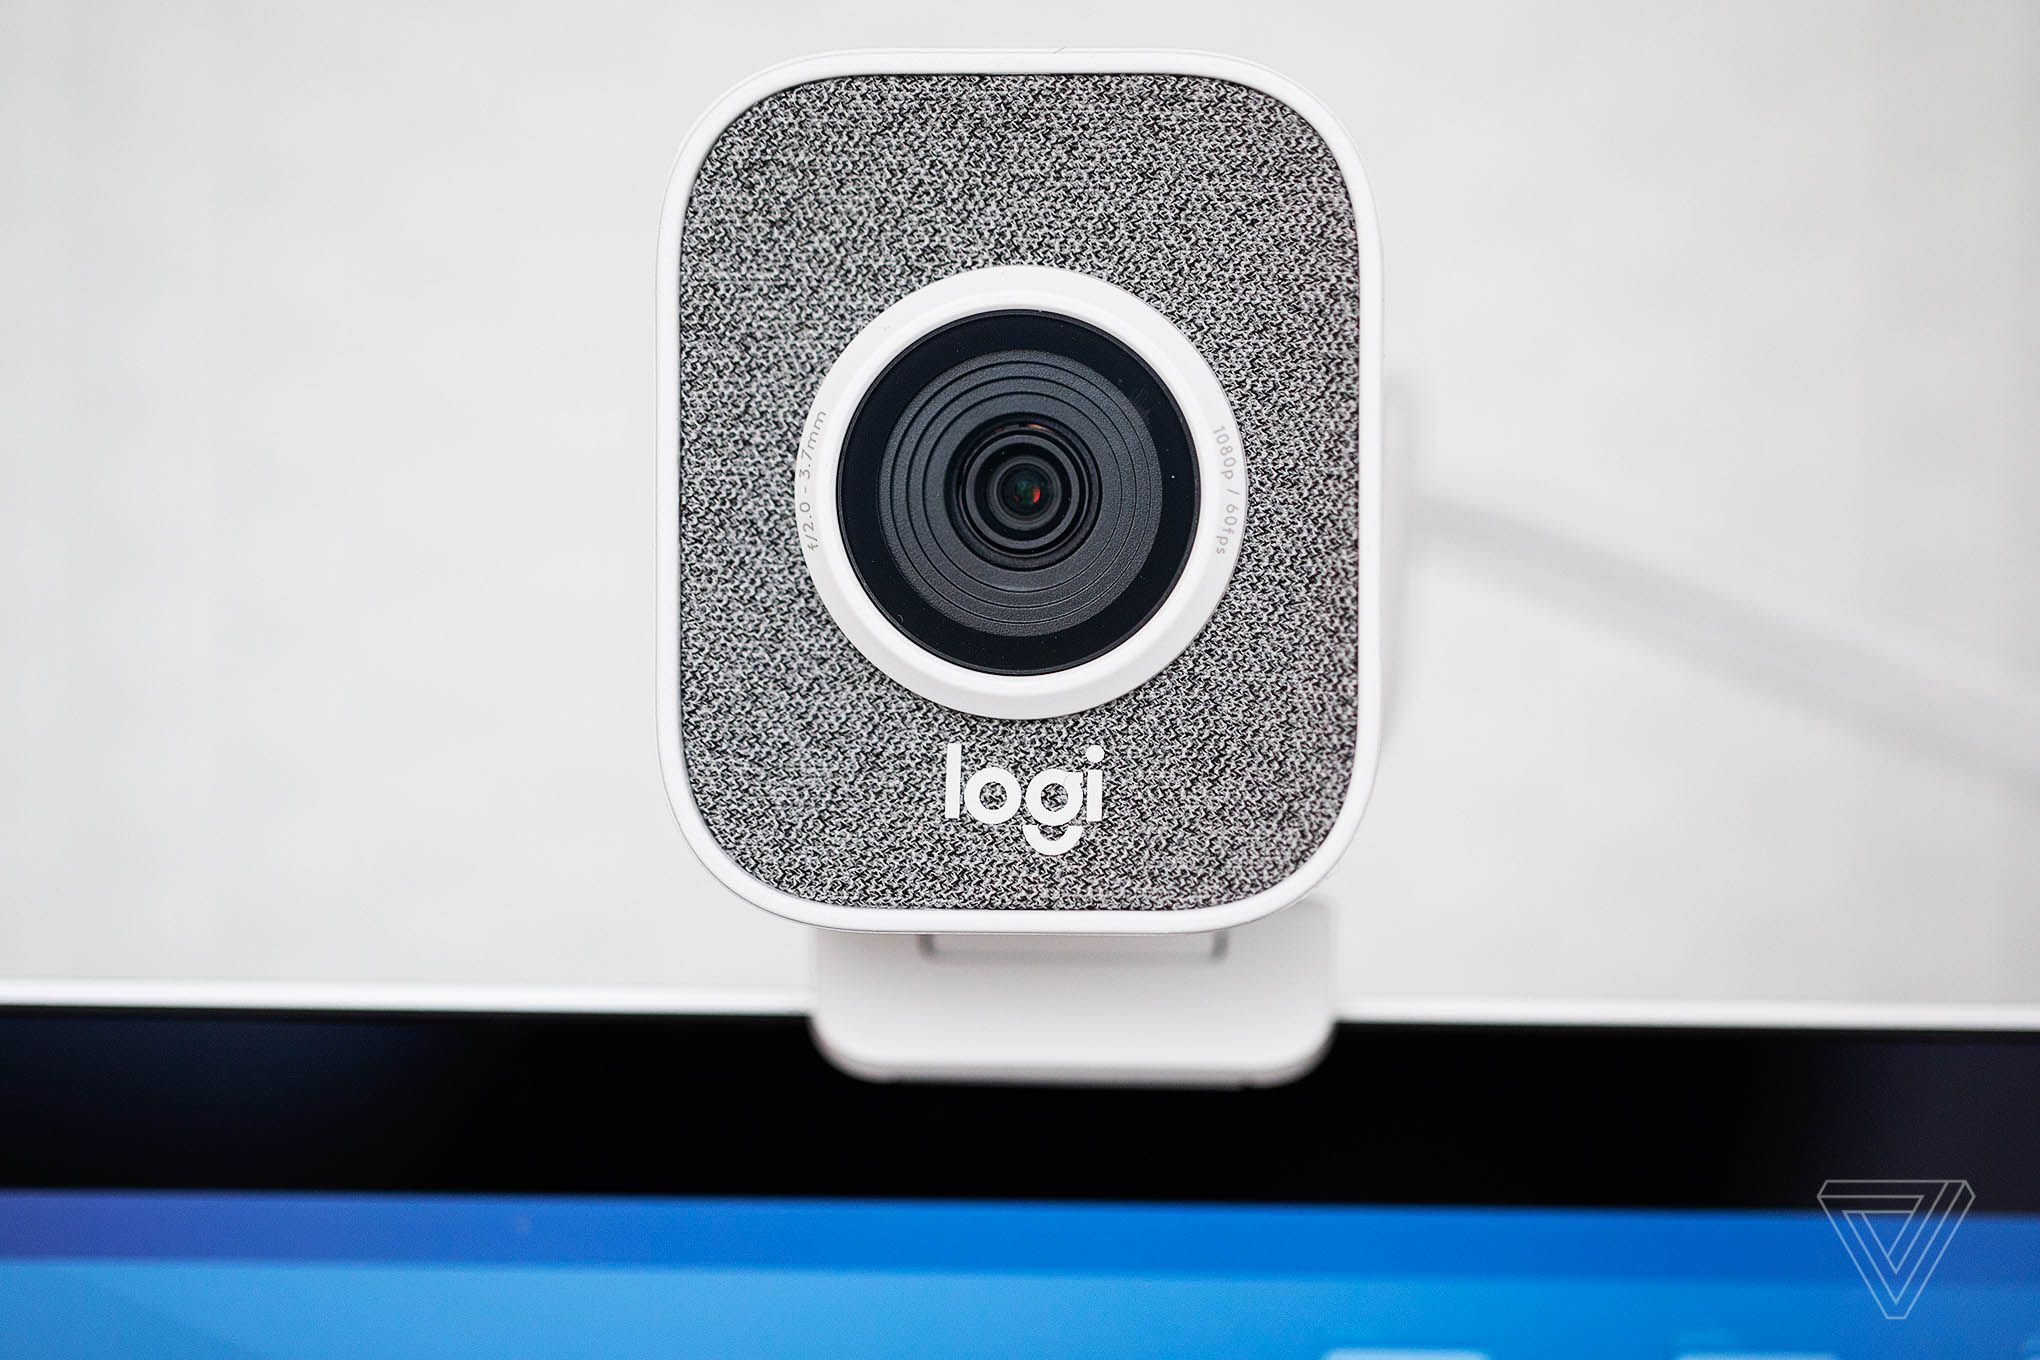 zoom Ud balance The Verge on Twitter: "Logitech's outstanding StreamCam is on sale for  nearly its best price to date https://t.co/FlKWoSlk82  https://t.co/txLbLjhadM" / Twitter